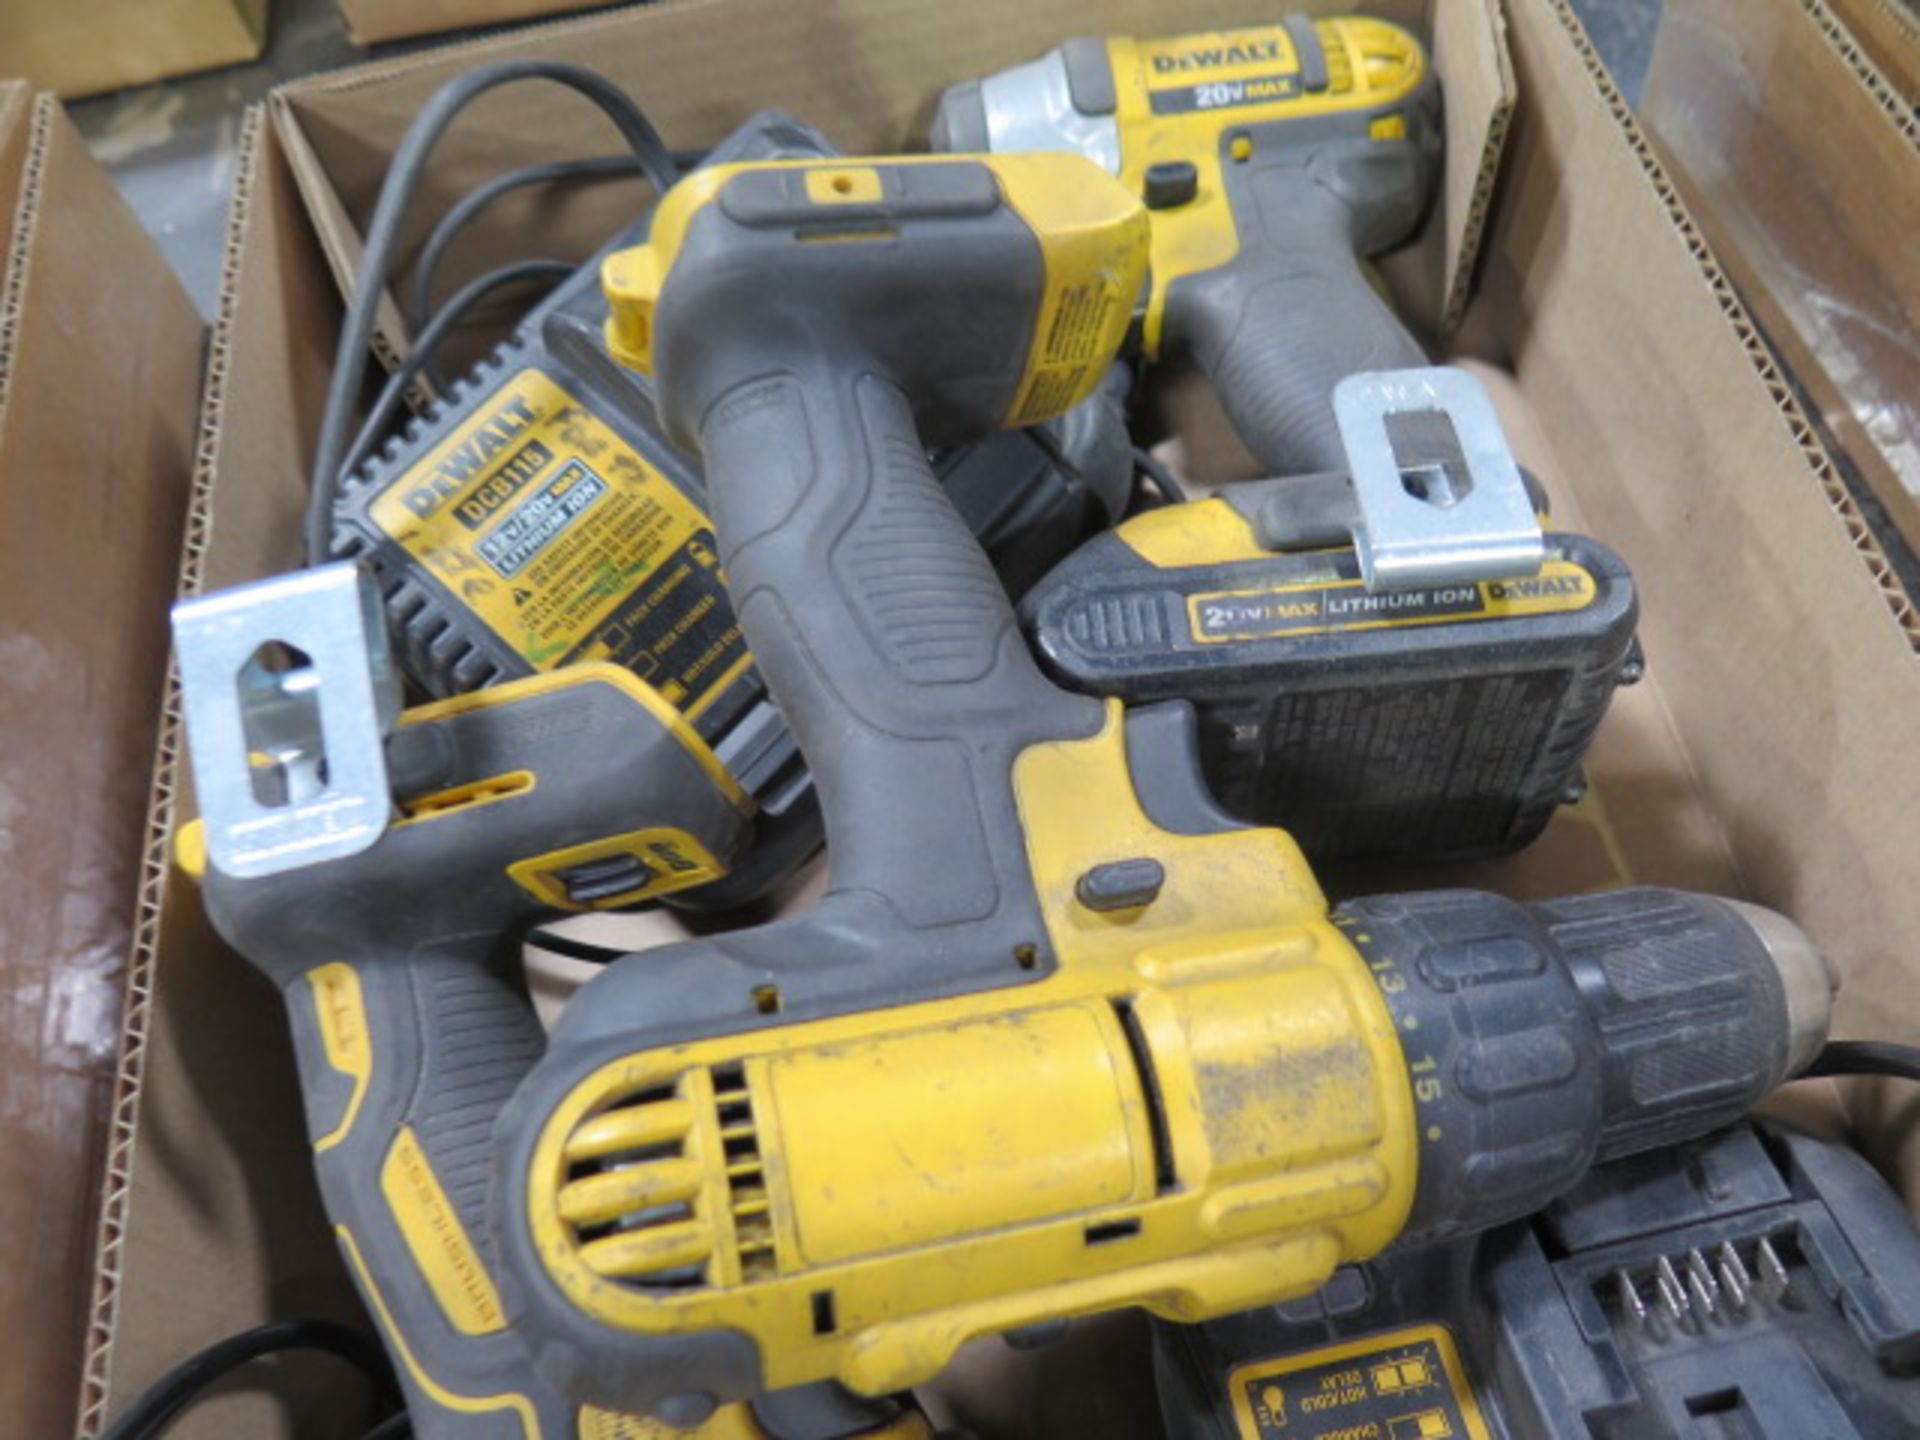 DeWalt 20 Volt Cordless Drills and Nut Drivers w/ Charger (SOLD AS-IS - NO WARRANTY) - Image 5 of 6